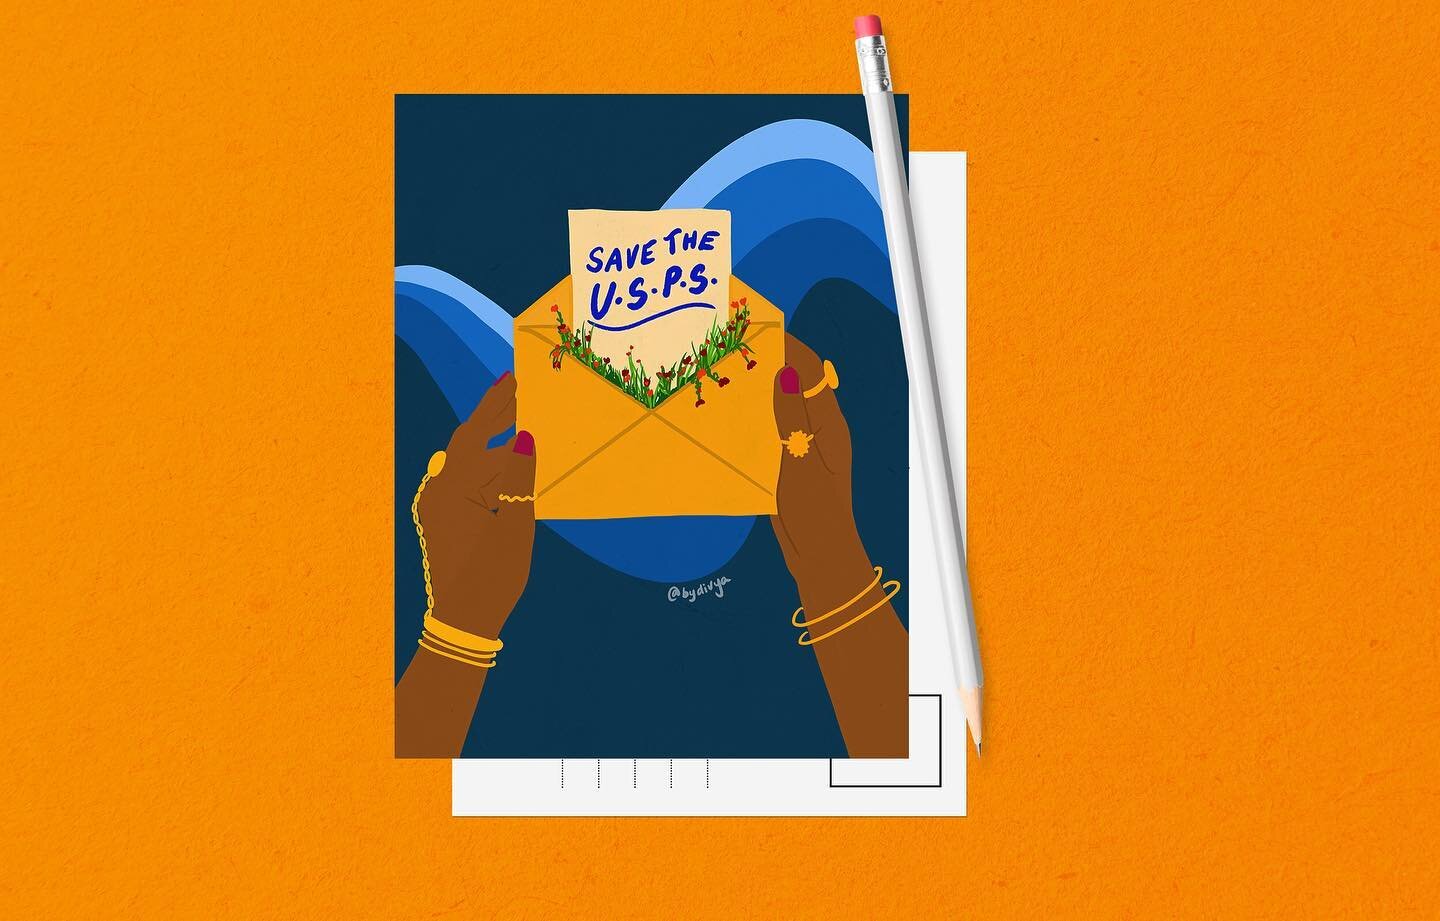 ☀️GIVEAWAY ALERT ☀️ I&rsquo;m sending out 200 hand written postcards to support the beloved USPS. If you want a chance to get one, just follow the rules: 
1. Tag two friends who you think would also enjoy this postcard.
2. For an additional entry sen